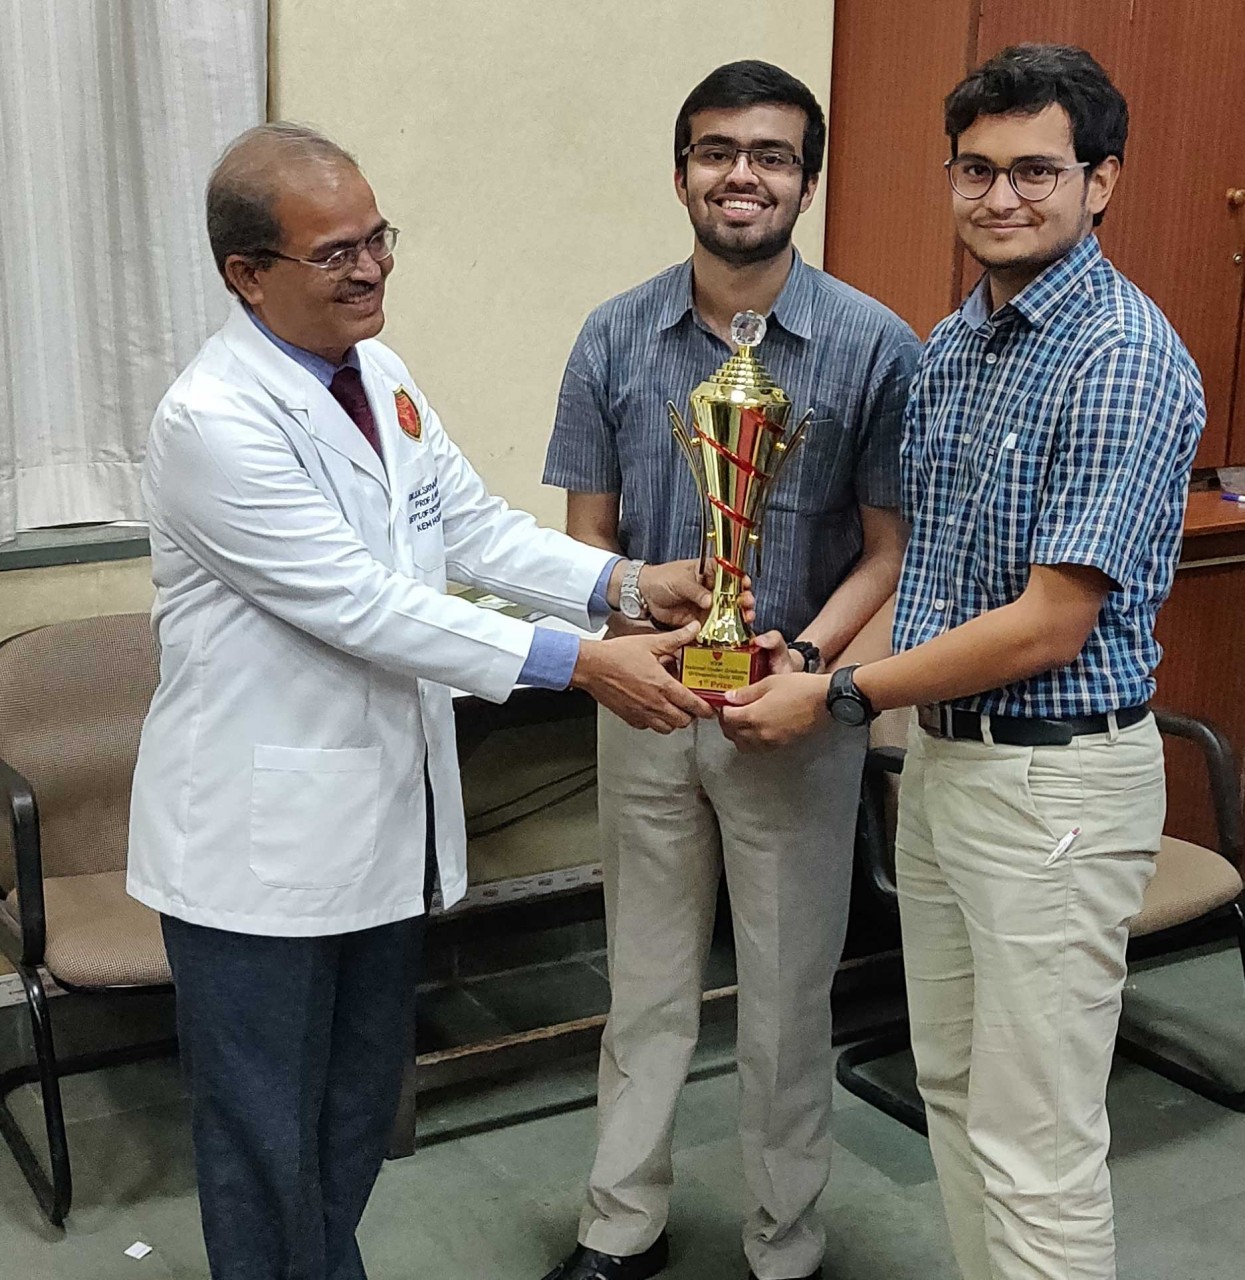 MGIMS secures first position in National Orthopedics quiz